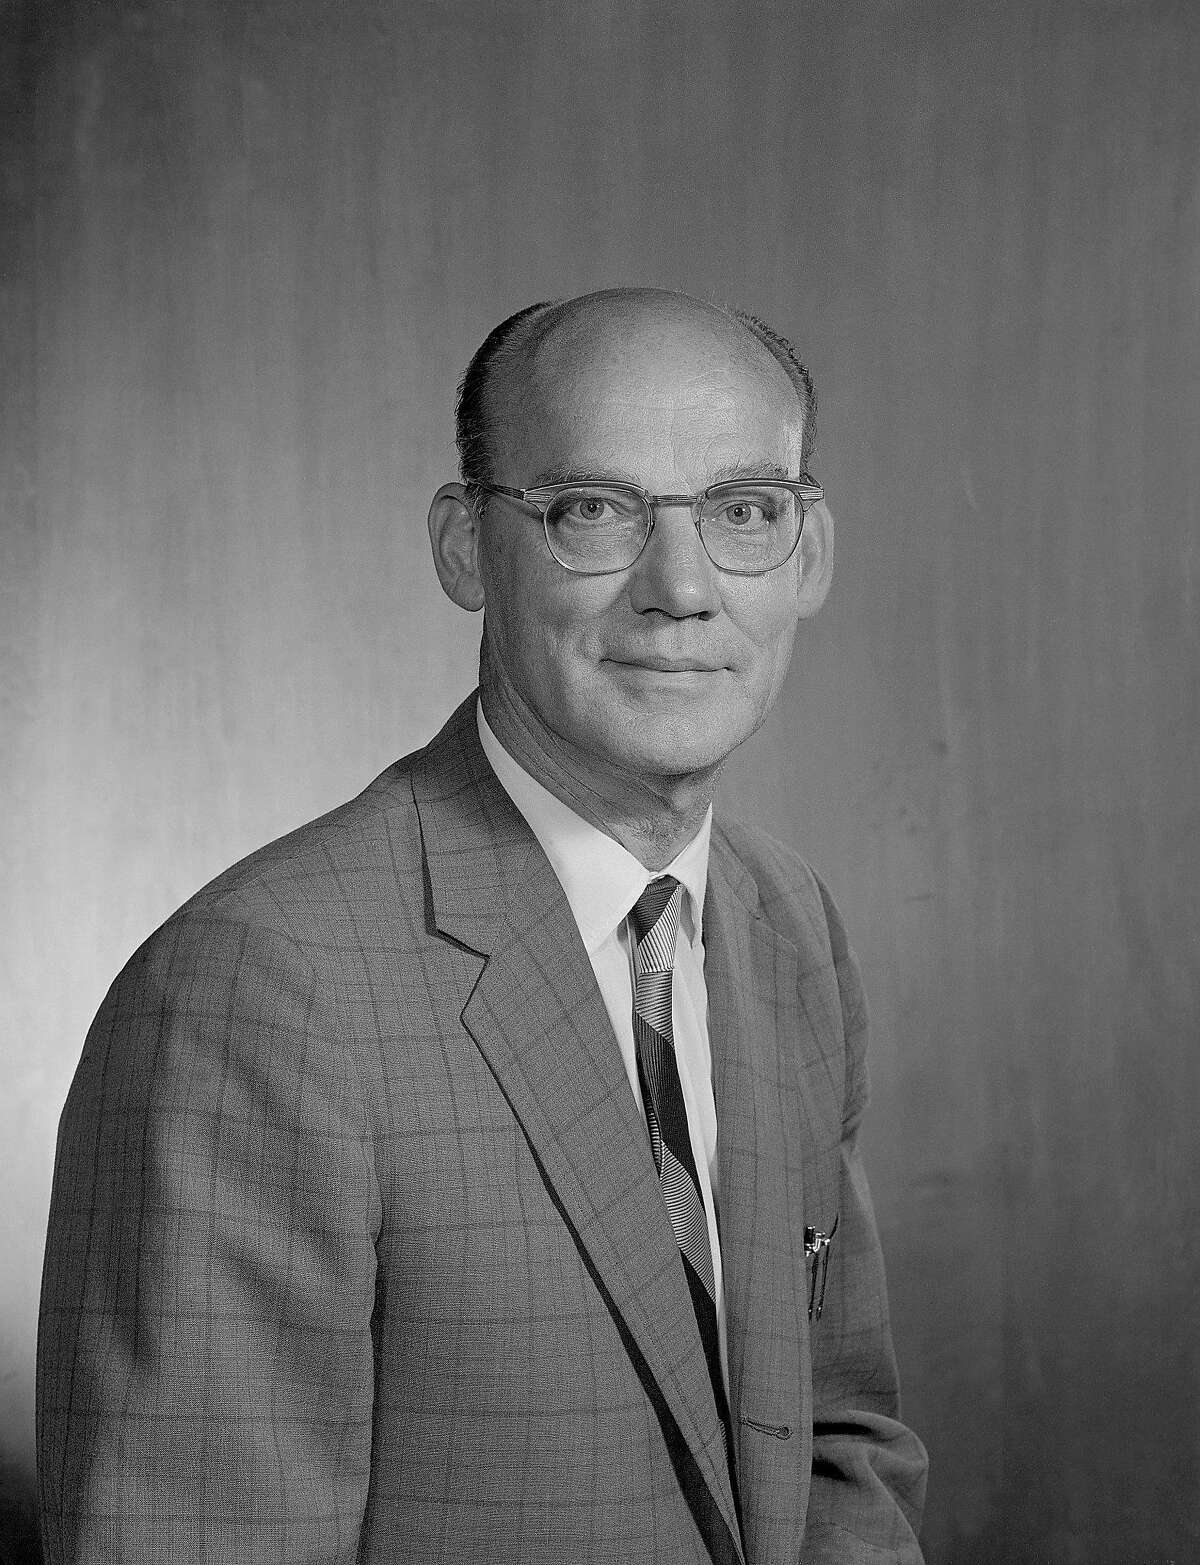 This undated photo released by the Lawrence Berkeley National Laboratory shows Edward Joseph Lofgren, a pioneering physicist at the Lawrence Berkeley National Laboratory. Lofgren, who led the development, construction and operation of the Bevatron, an early particle accelerator at the lab, died on Sept. 6, 2016. He was 102. (Lawrence Berkeley National Laboratory via AP)